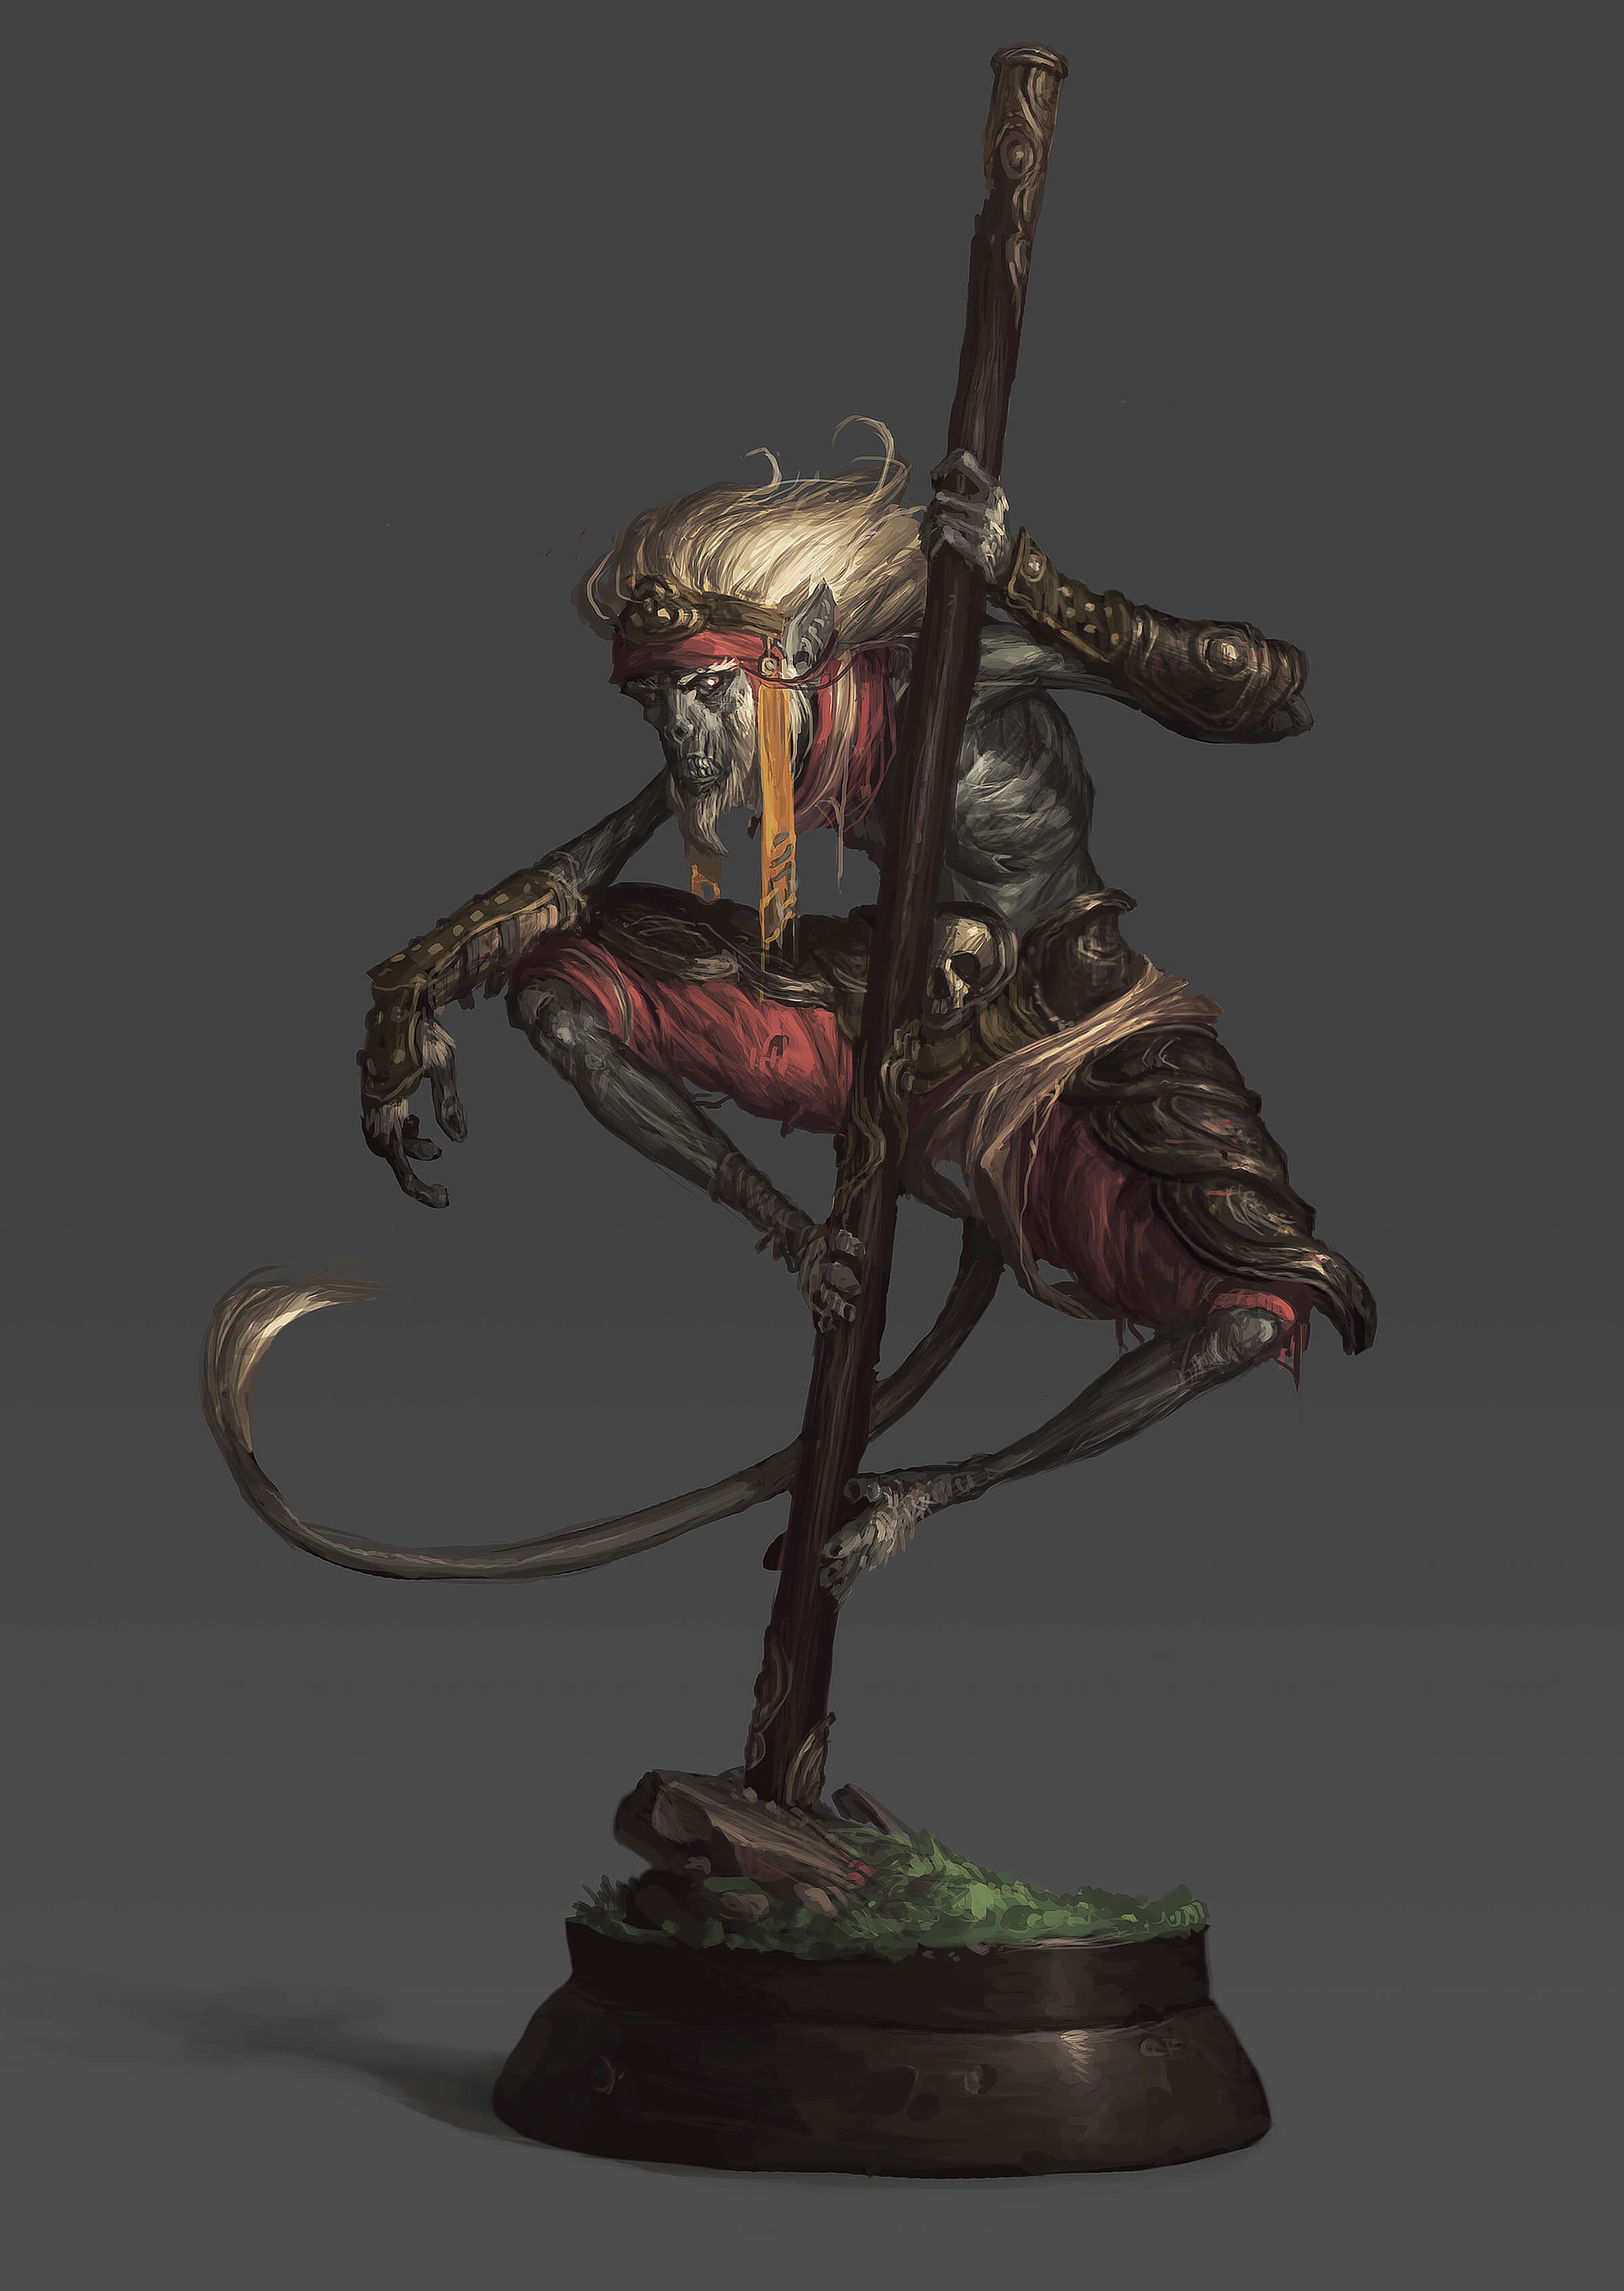 A desiccated or undead monkey with white hair balances on a tall wooden staff while dressed in ancient warrior garb.